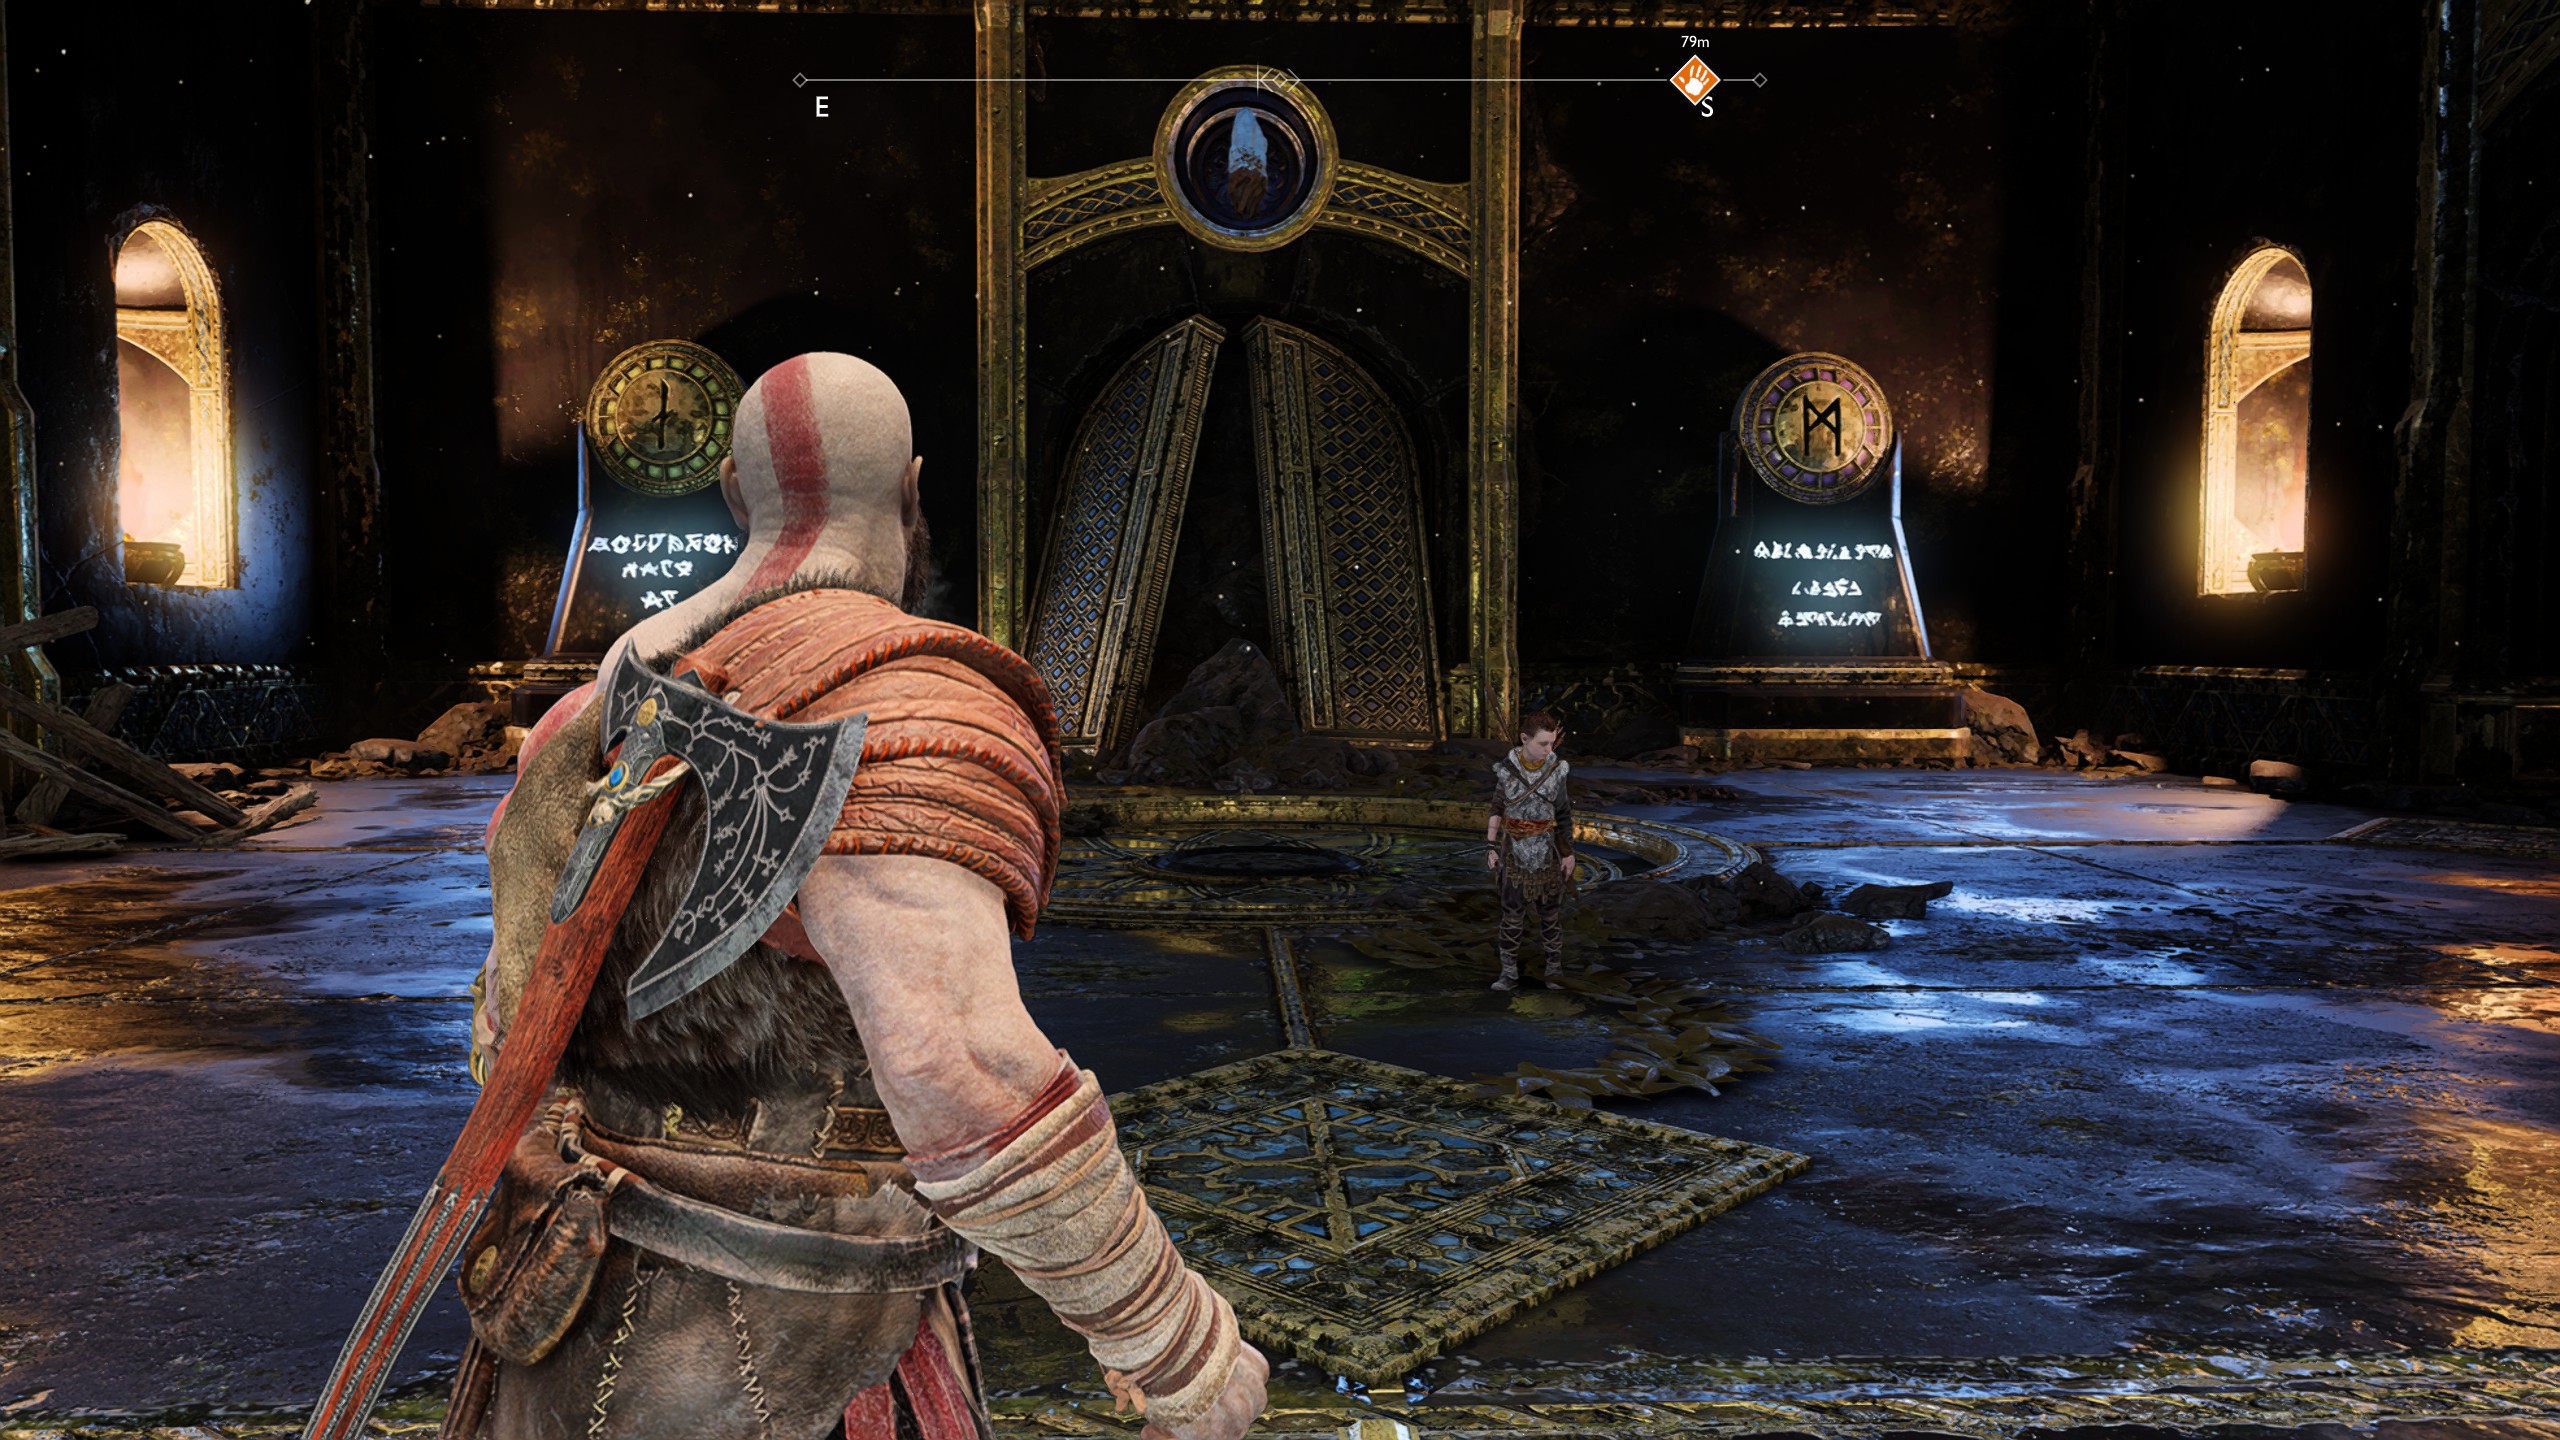 Indoors area at ultra quality FSR setting in God of War.